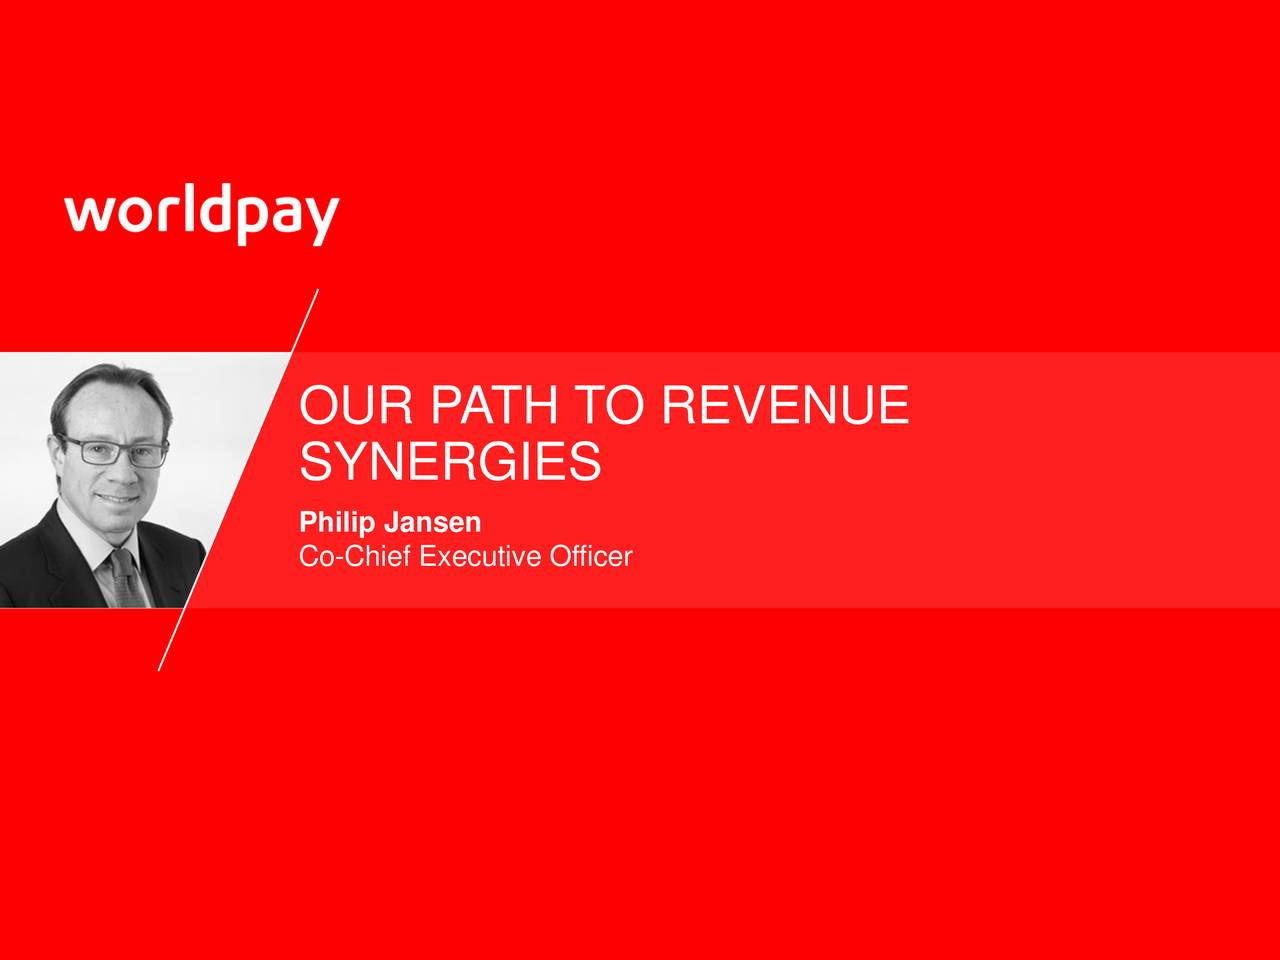 OUR PATH TO REVENUE